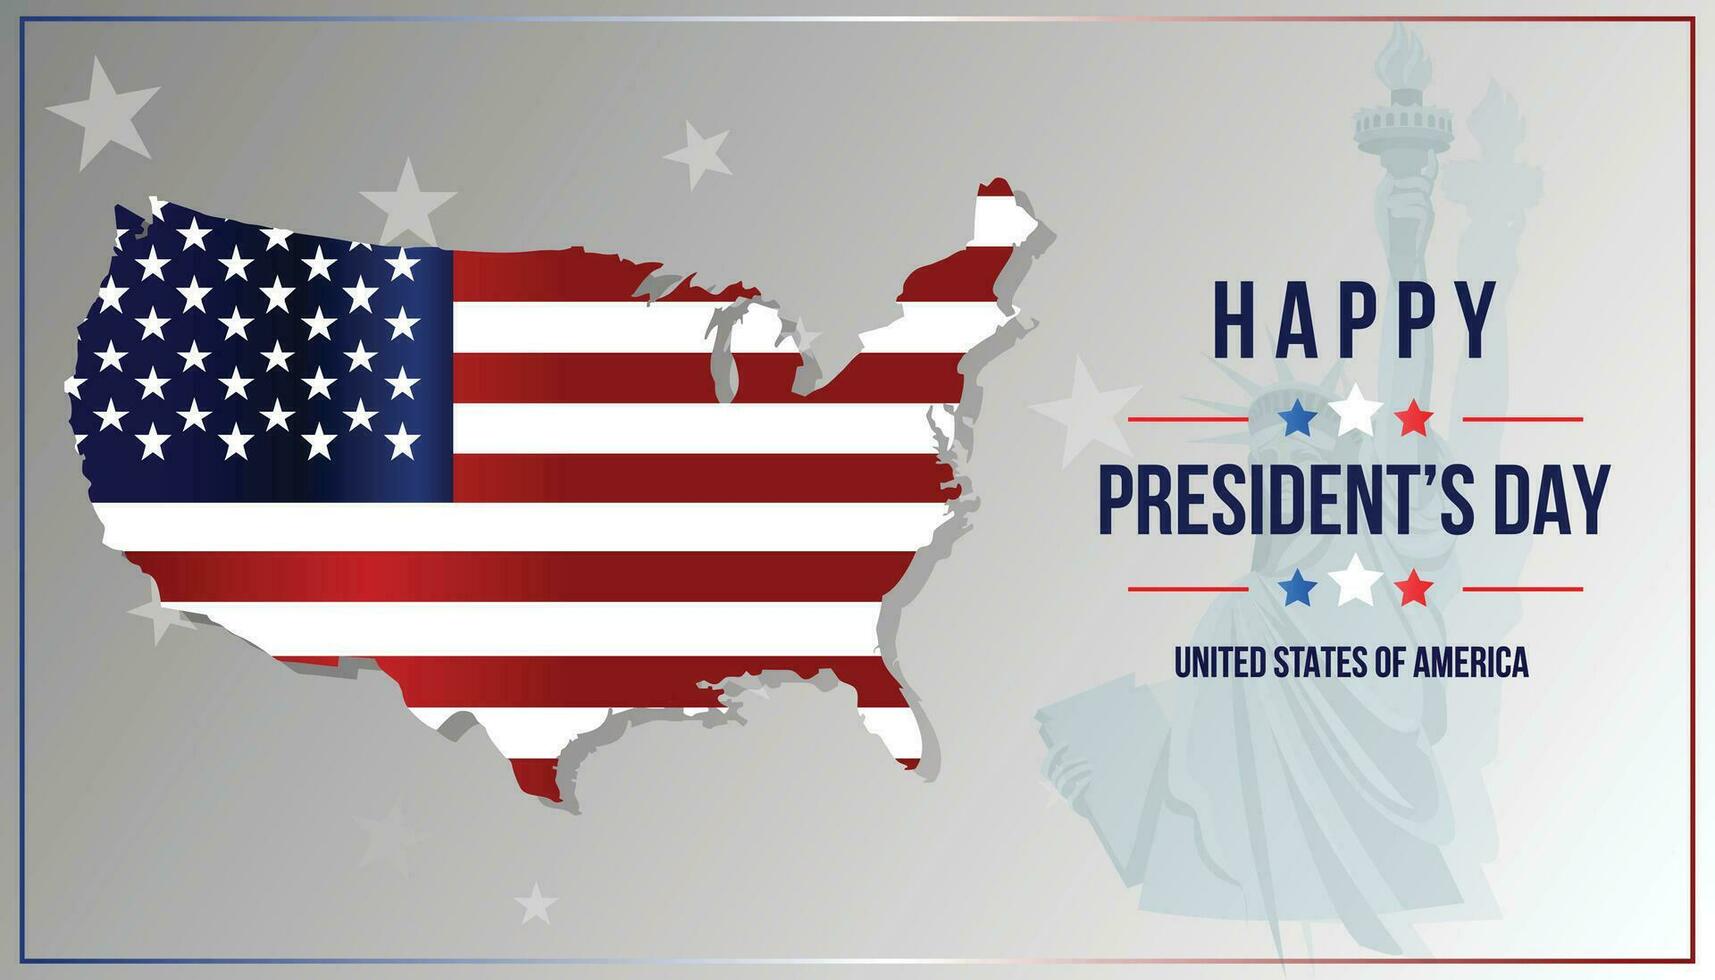 Presidents Day Background Design vector